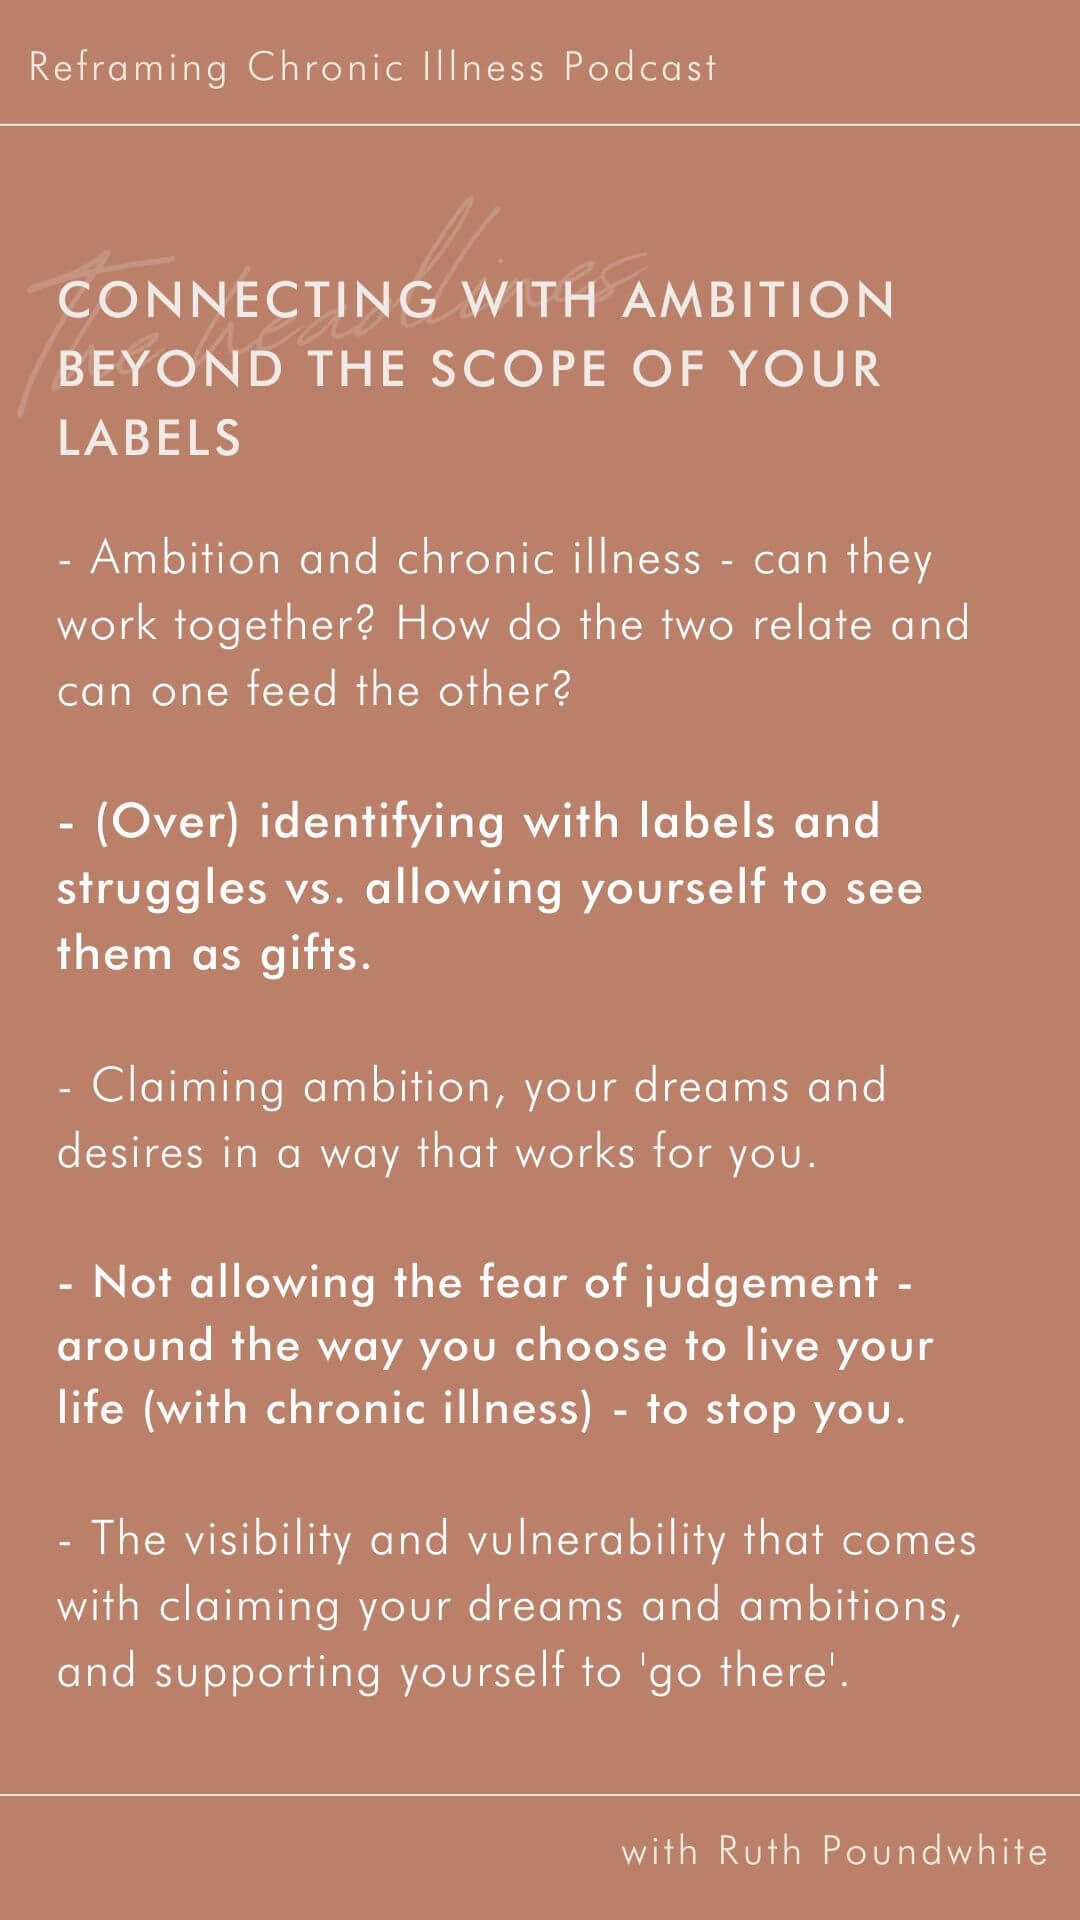 Connecting with ambition beyond the scope of your labels - Ruth Poundwhite Aligned Business Coach and Mentor and Alana Holloway Chronic Illness Coach - Reframing Chronic Illness Podcast 2.jpg